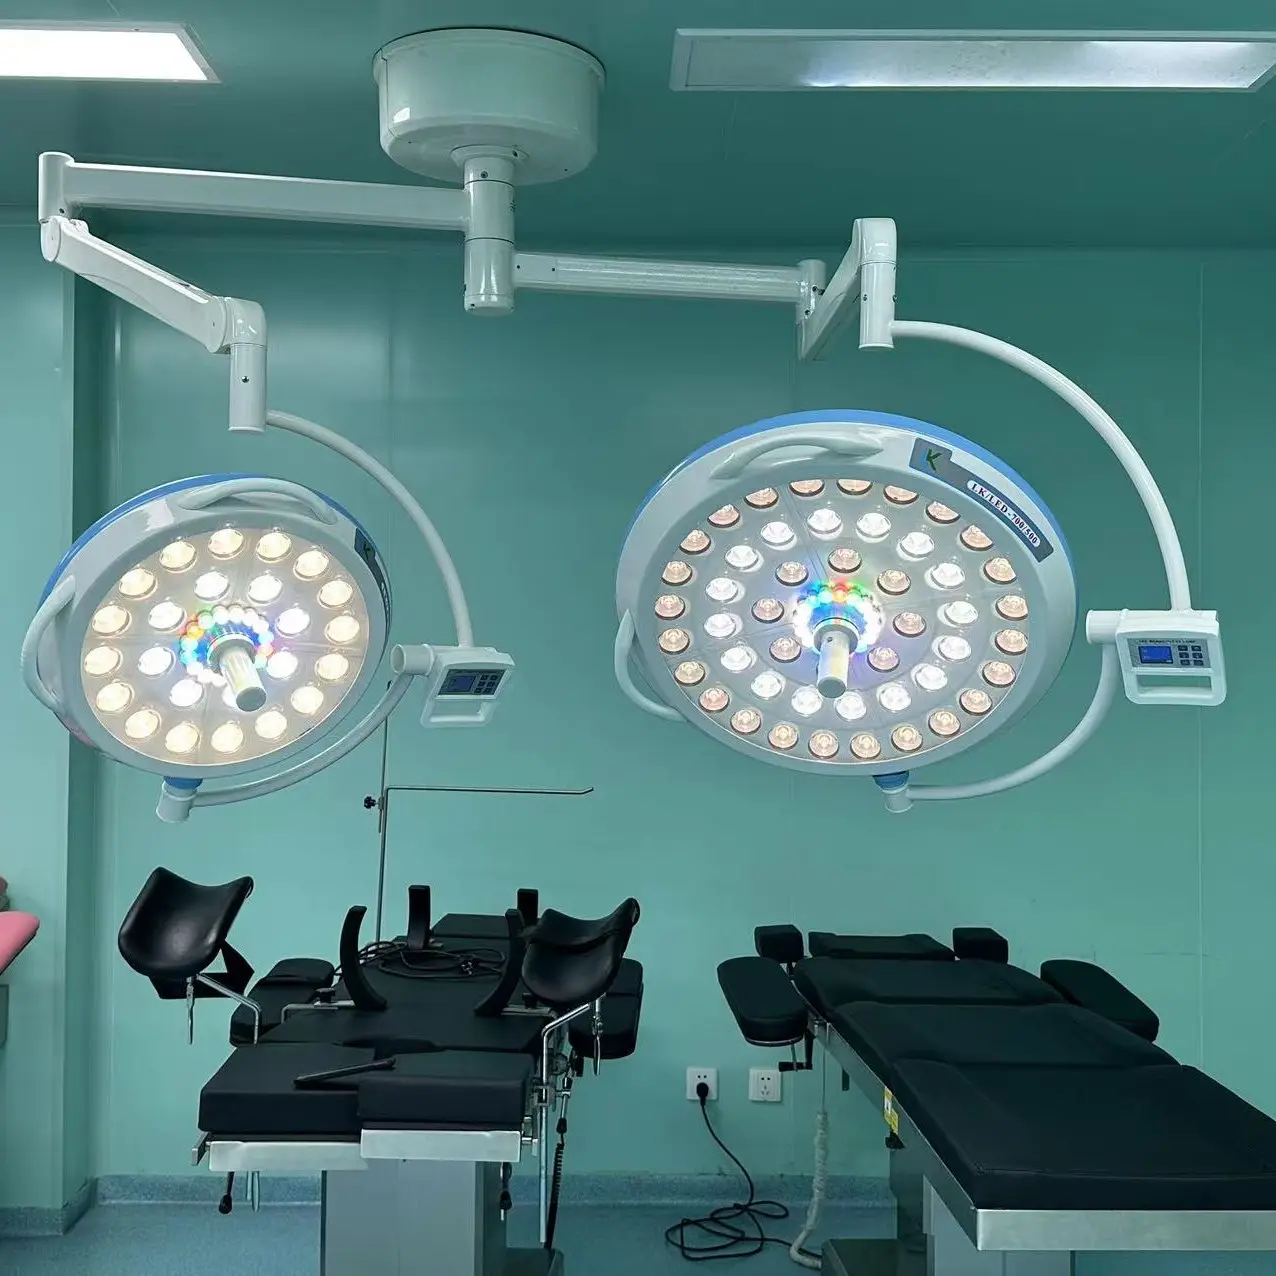 Hot selling surgical light for examination shadowless LED Ceiling operation lamp